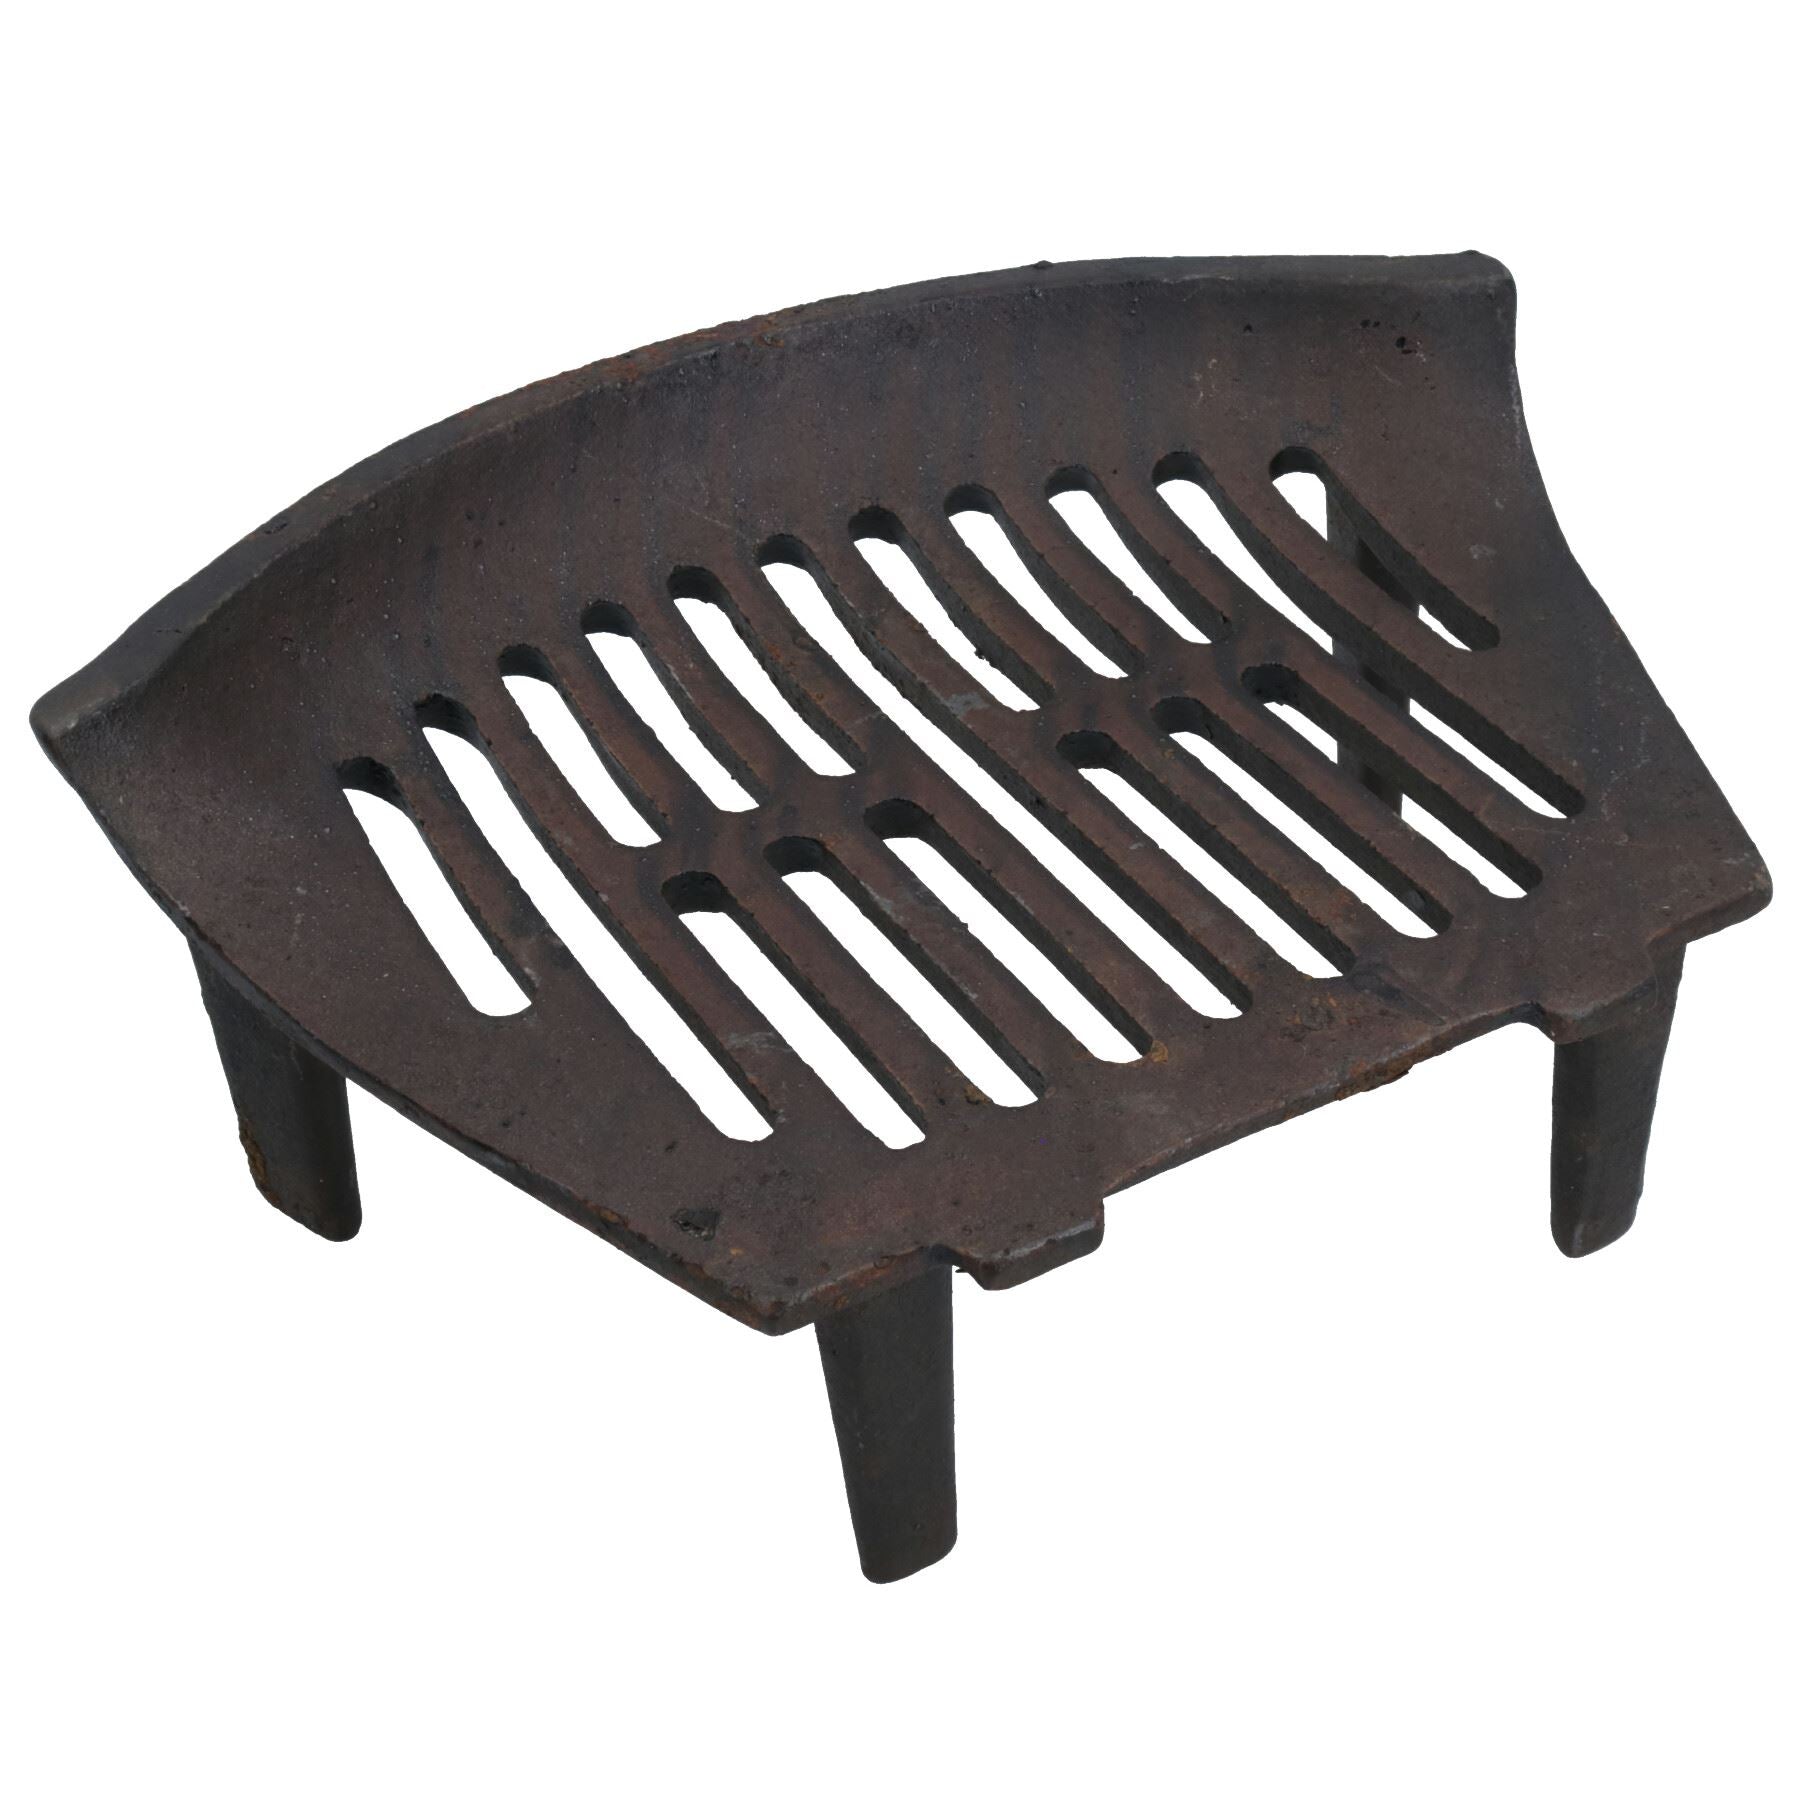 13" Fire Grate For 14" Fireplace Cast Iron Coal Log Black Front RUSTY